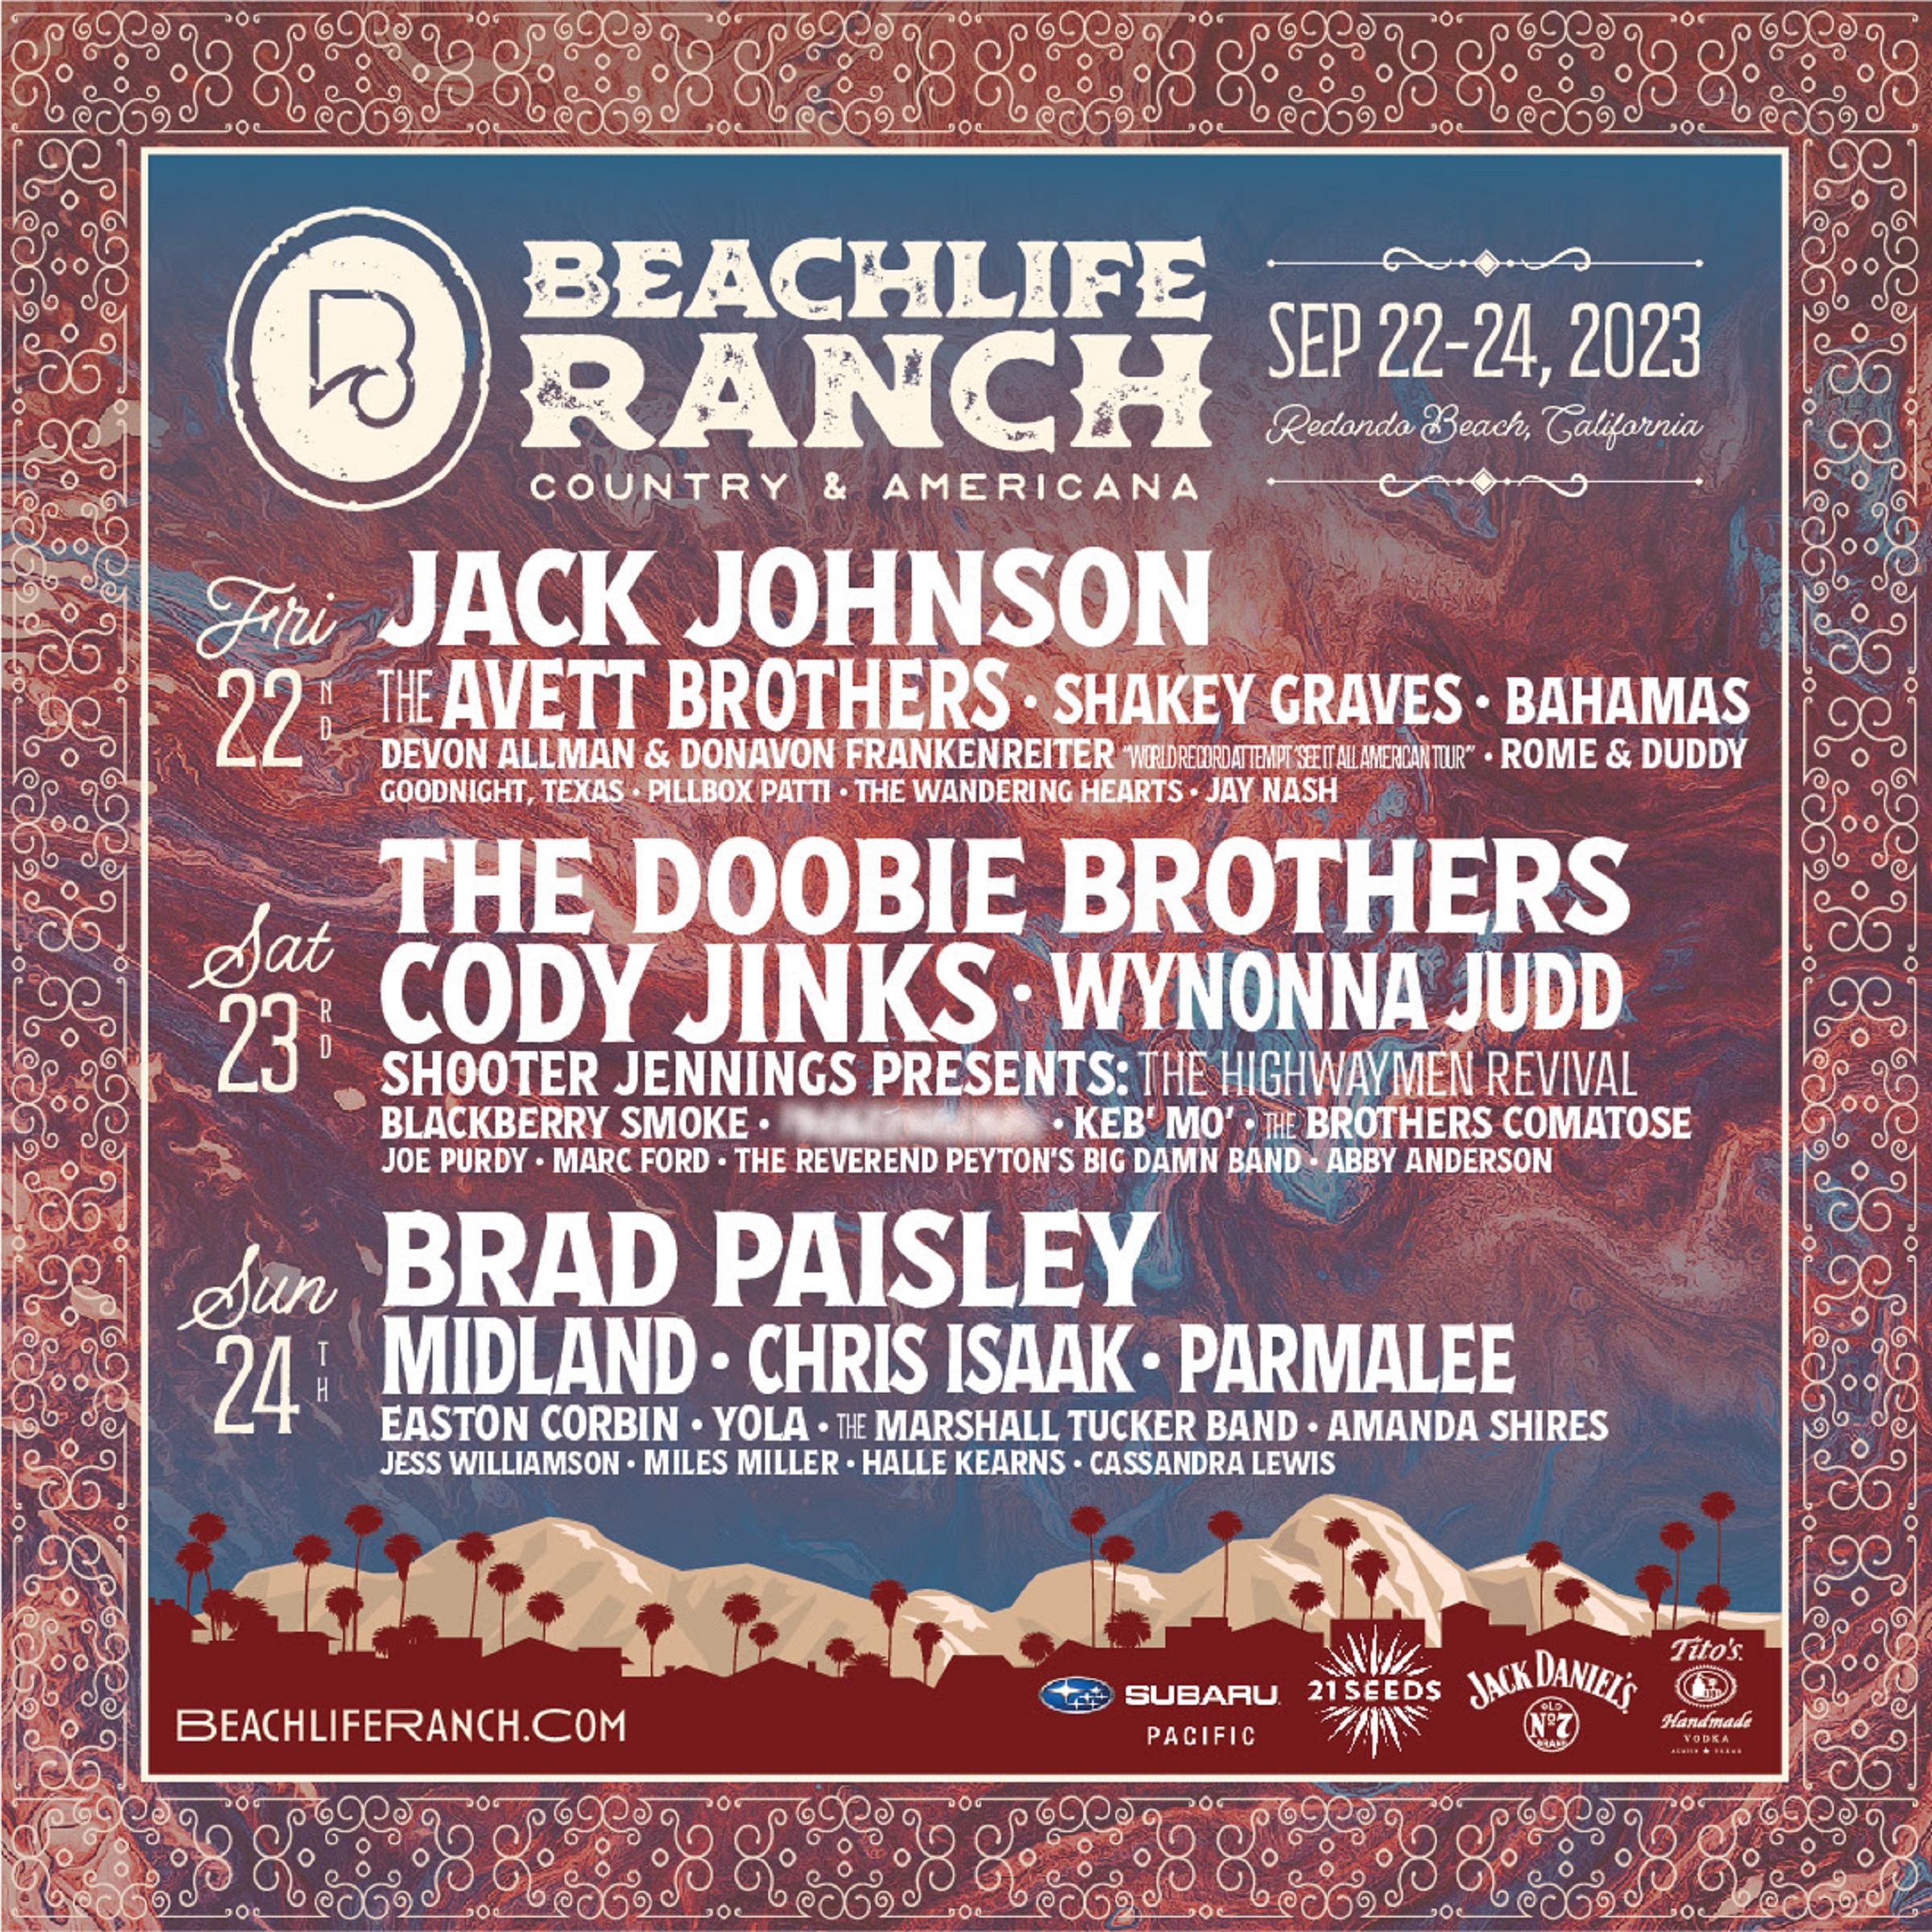 BeachLife Ranch Announces Lineup for 2nd Annual Event; Jack Johnson, Brad Paisley, The Doobie Brothers, Cody Jinks, and More to Perform